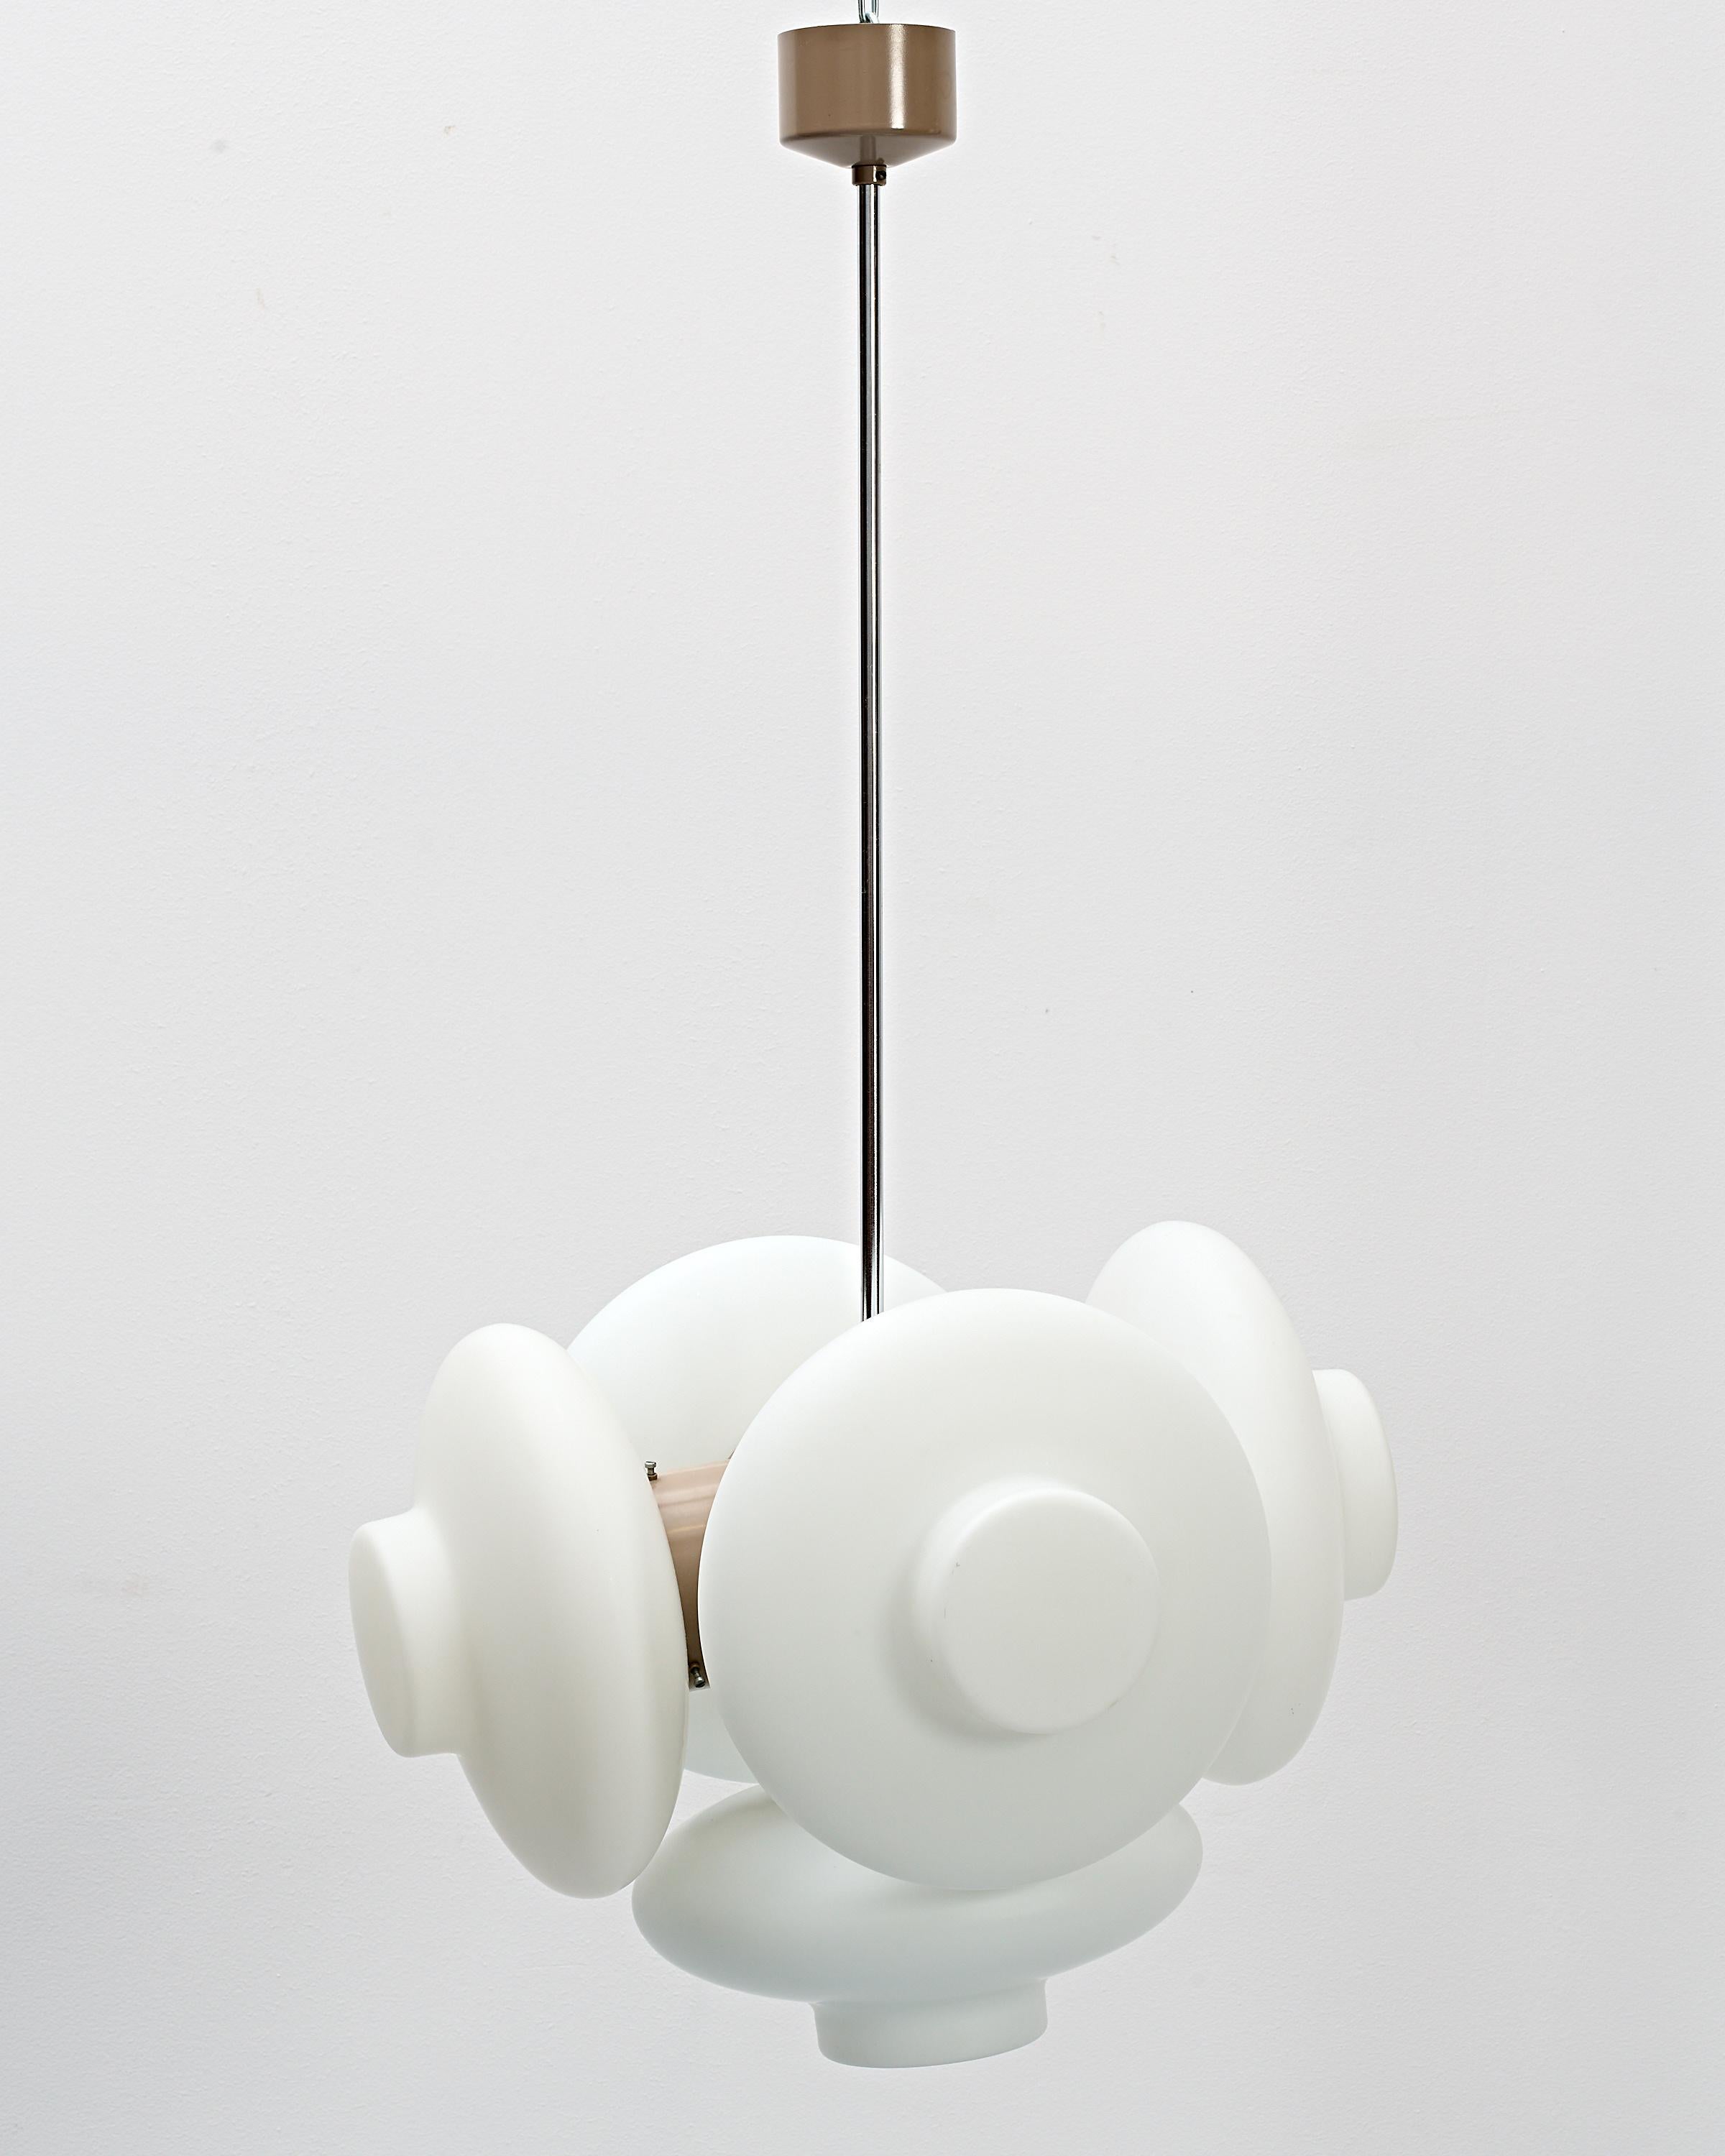 A unique hanging lamp produced by Napako, designed by Josef Hůrka, a renowned lighting designer, during the 60's.

Five round opaline glass lampshades, 20 cm in diameter.

A diffused light effect.

